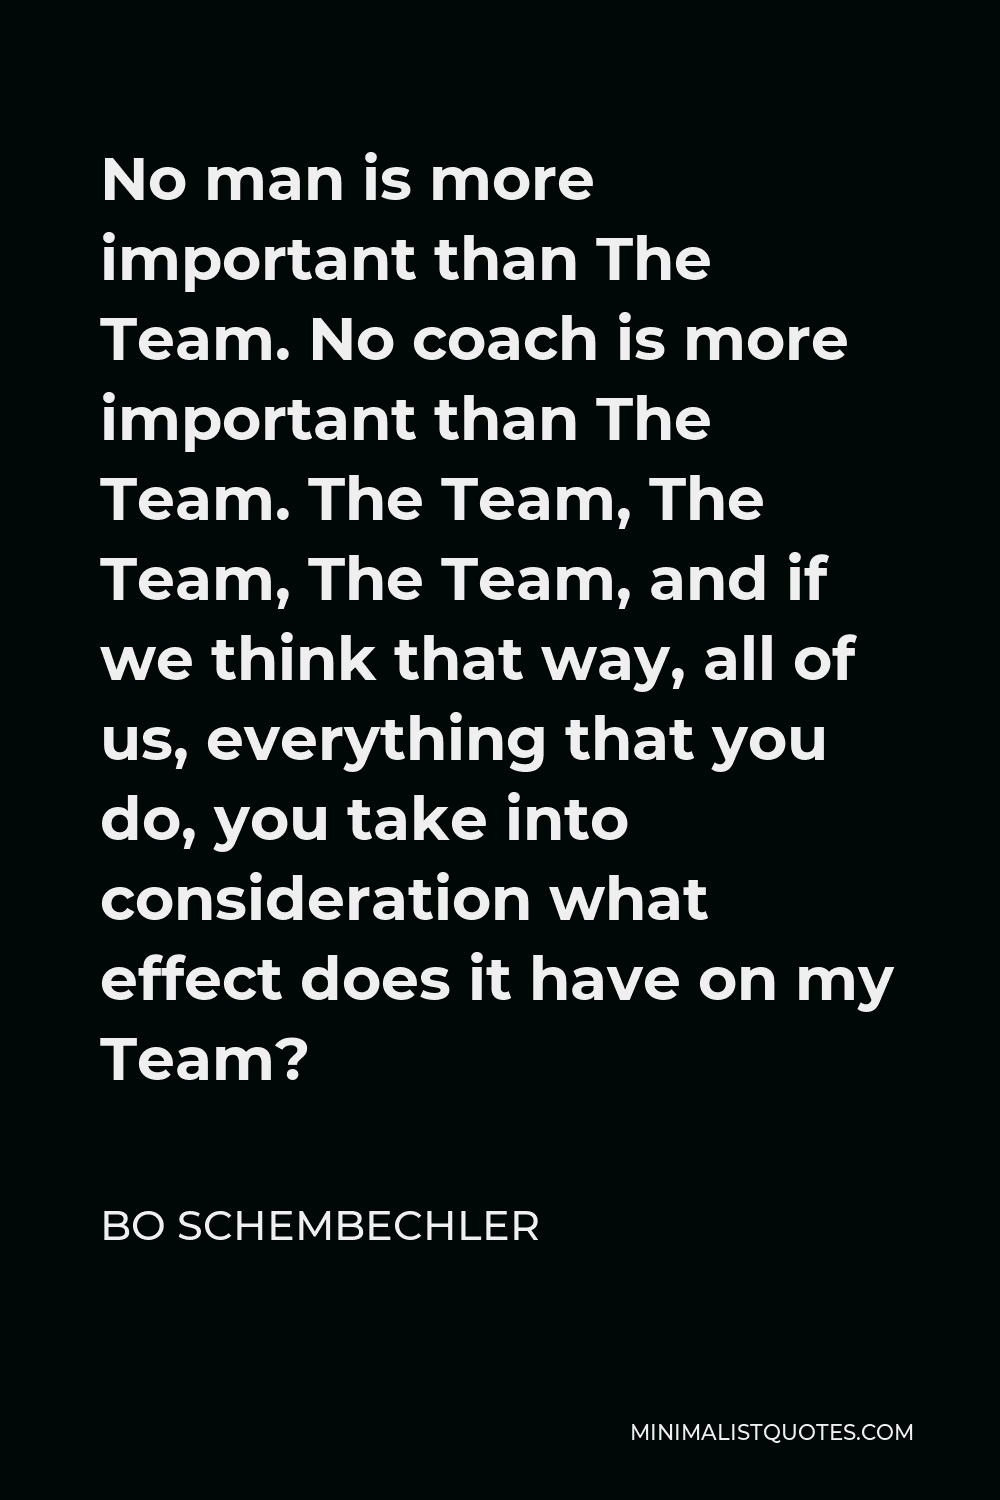 Bo Schembechler Quote - No man is more important than The Team. No coach is more important than The Team. The Team, The Team, The Team, and if we think that way, all of us, everything that you do, you take into consideration what effect does it have on my Team?